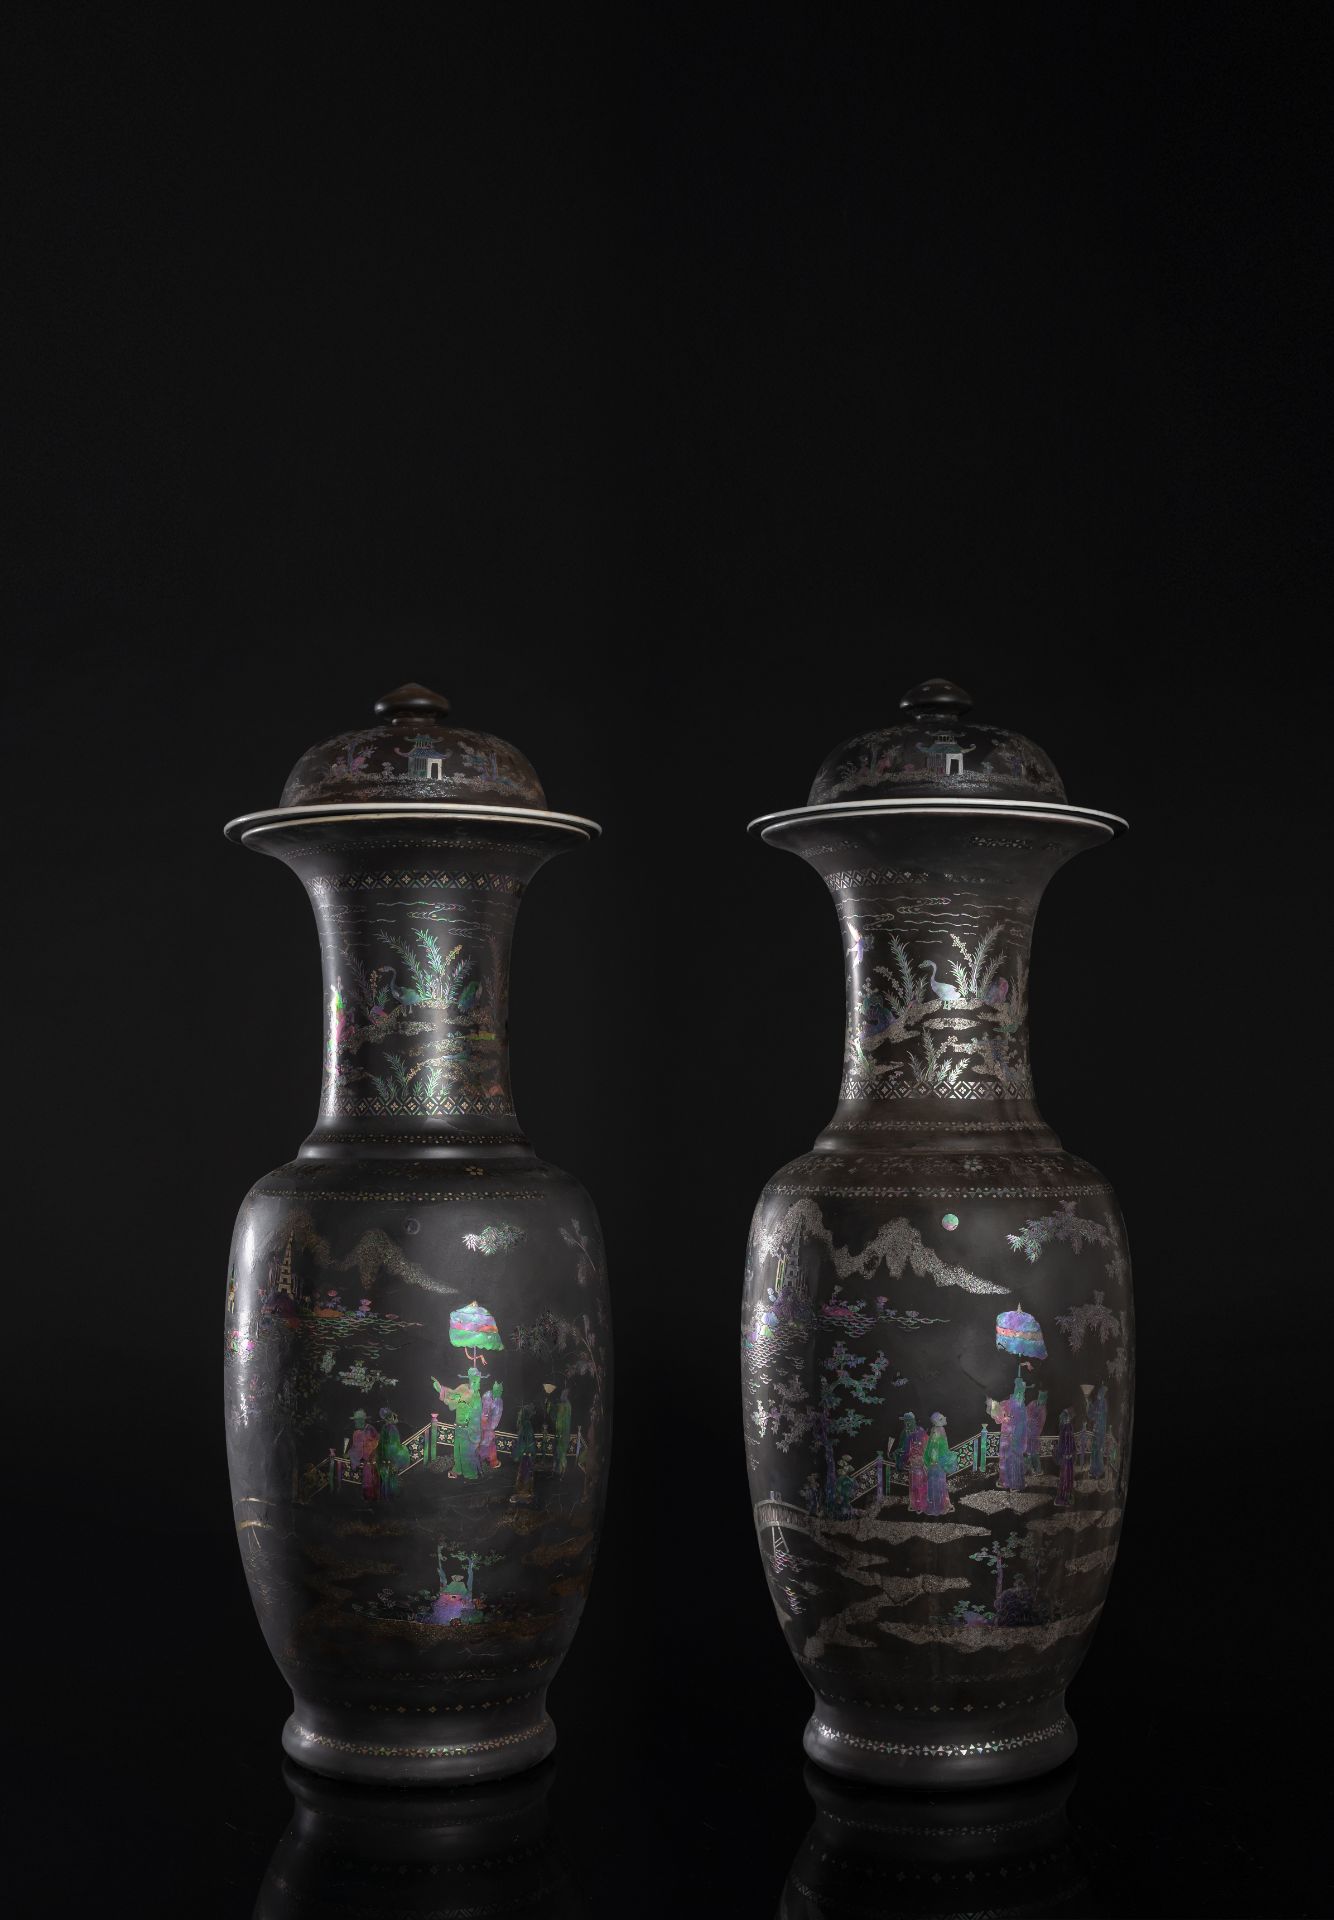 A VERY RARE AND LARGE PAIR OF LAC-BURGAUTÉ PORCELAIN VASES AND COVERS - Image 2 of 7